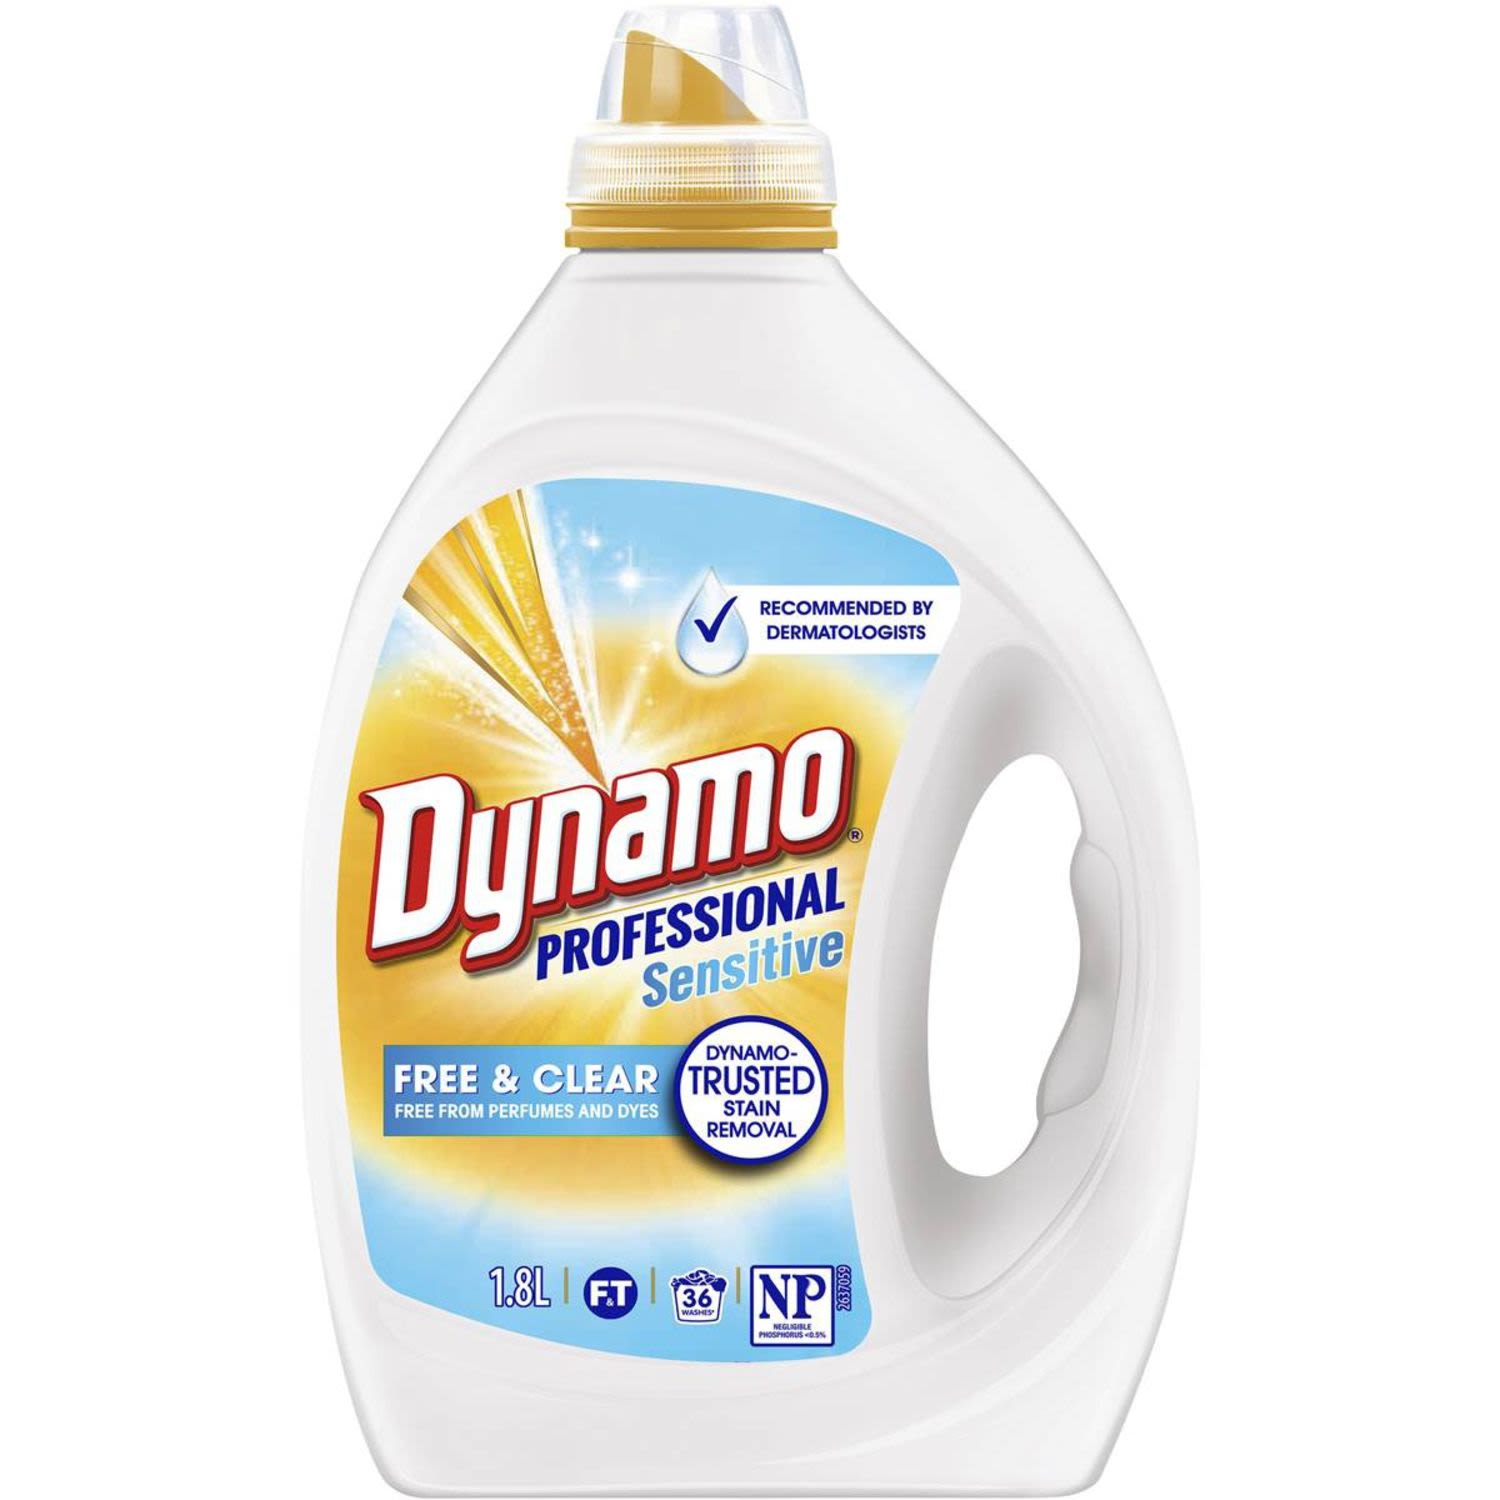 Dynamo Professional Free & Clear Laundry Detergent for sensitive skin, 1.8 Litre